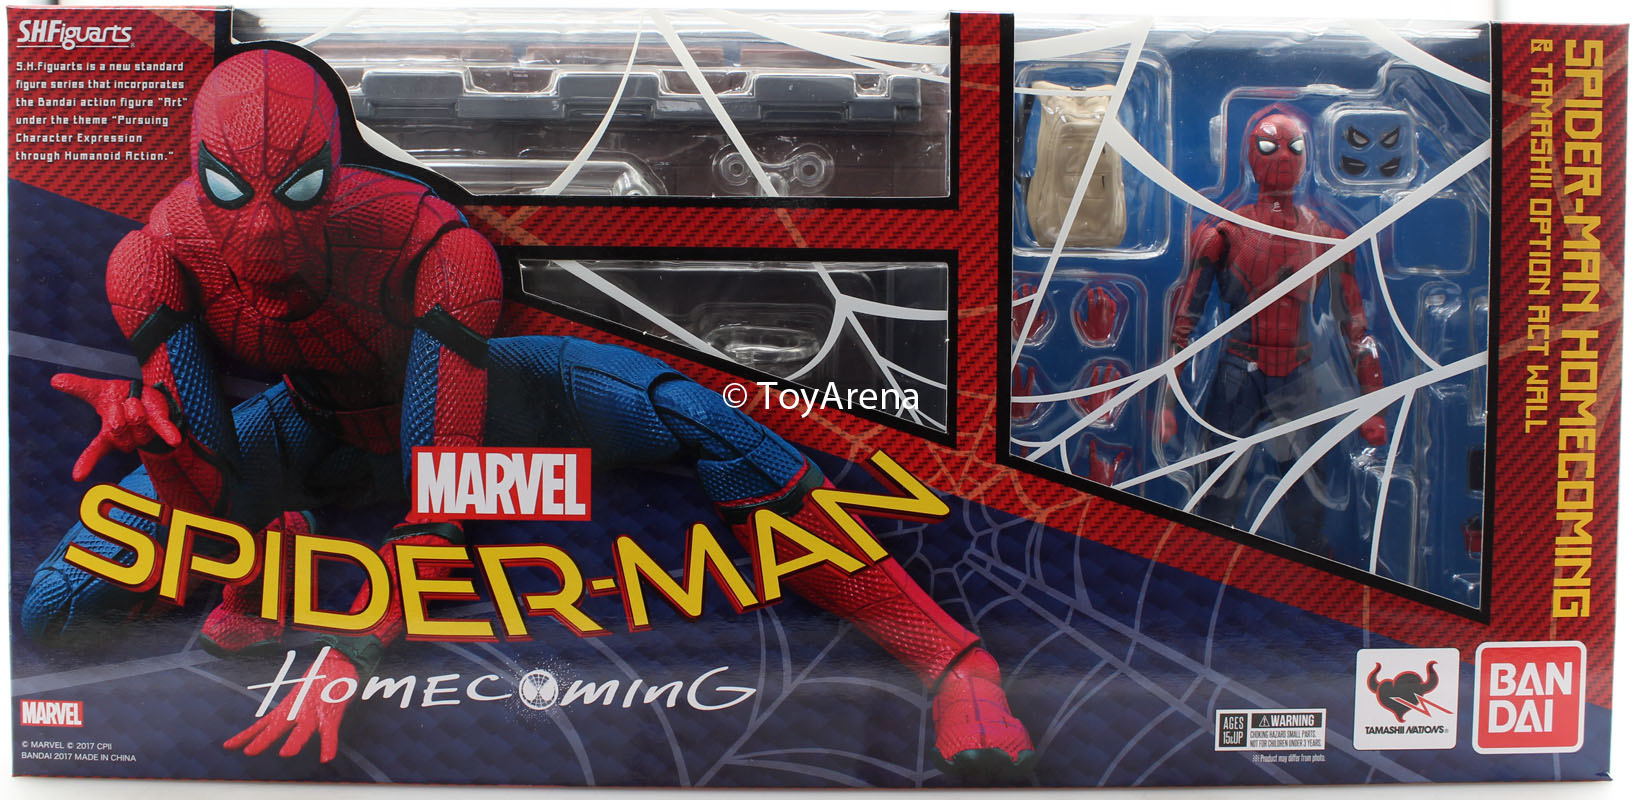 S.H. Figuarts Marvel Spider Man Spiderman: Homecoming & Tamashii ACT Wall Action Figure